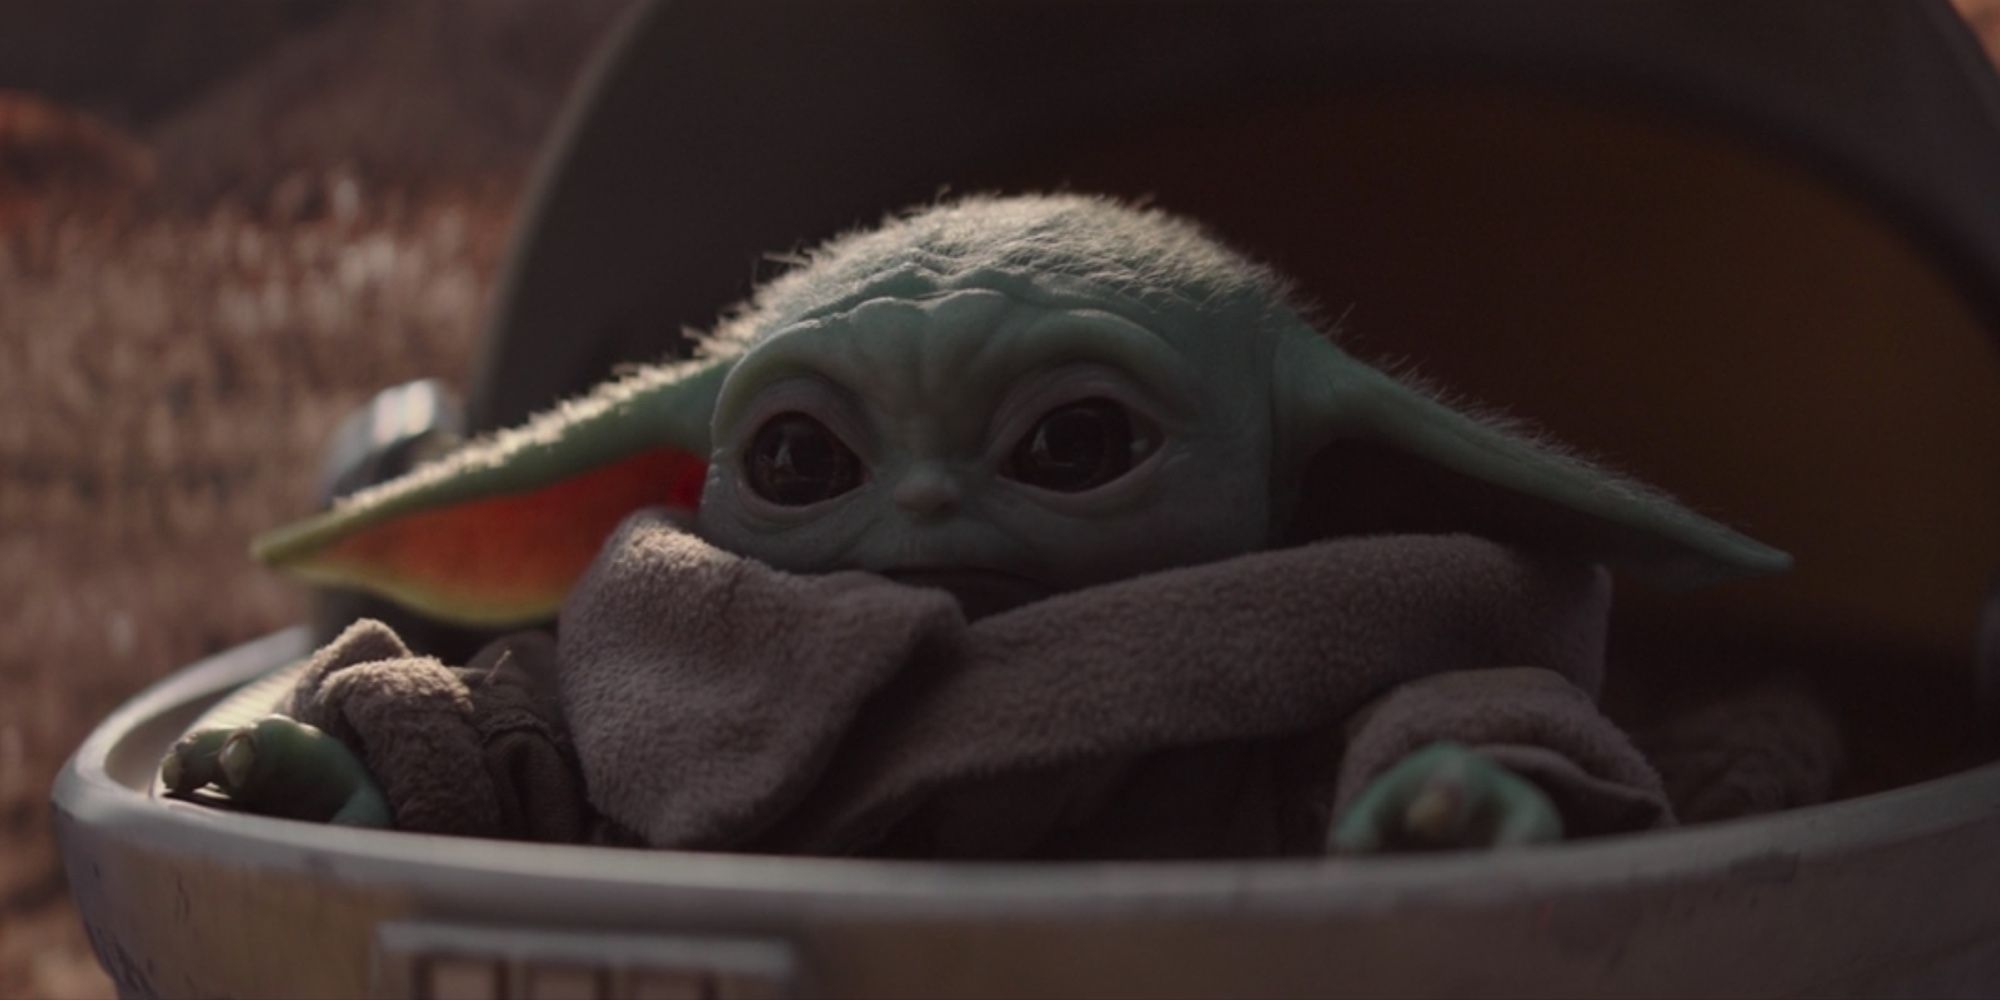 10 Cutest Baby Yoda Memes That We Can't Get Over | ScreenRant